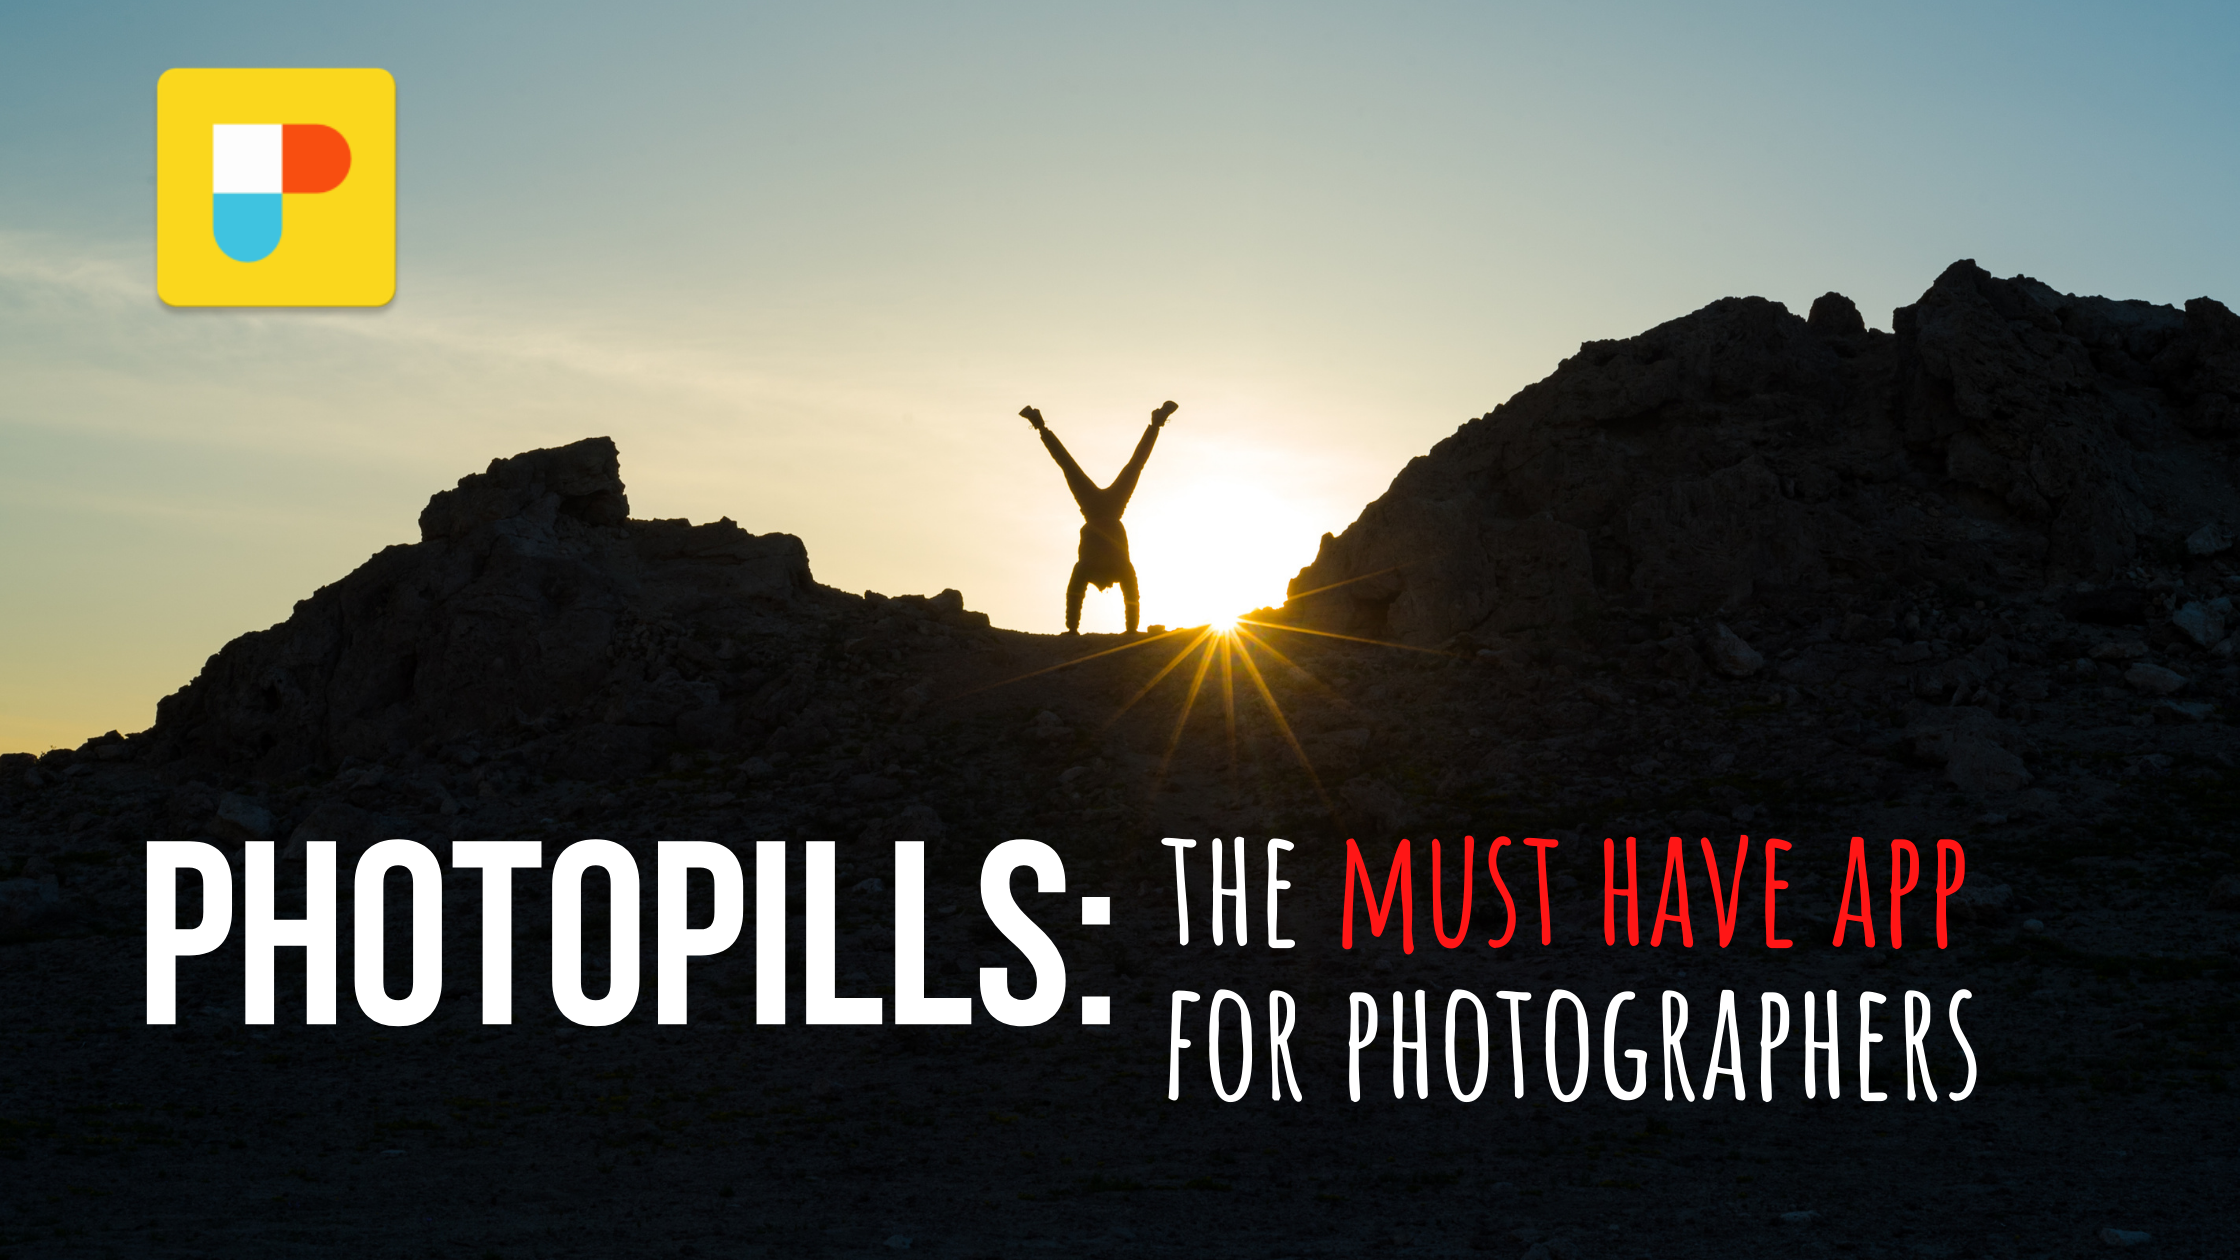 Photopills: The Best App for Photographers